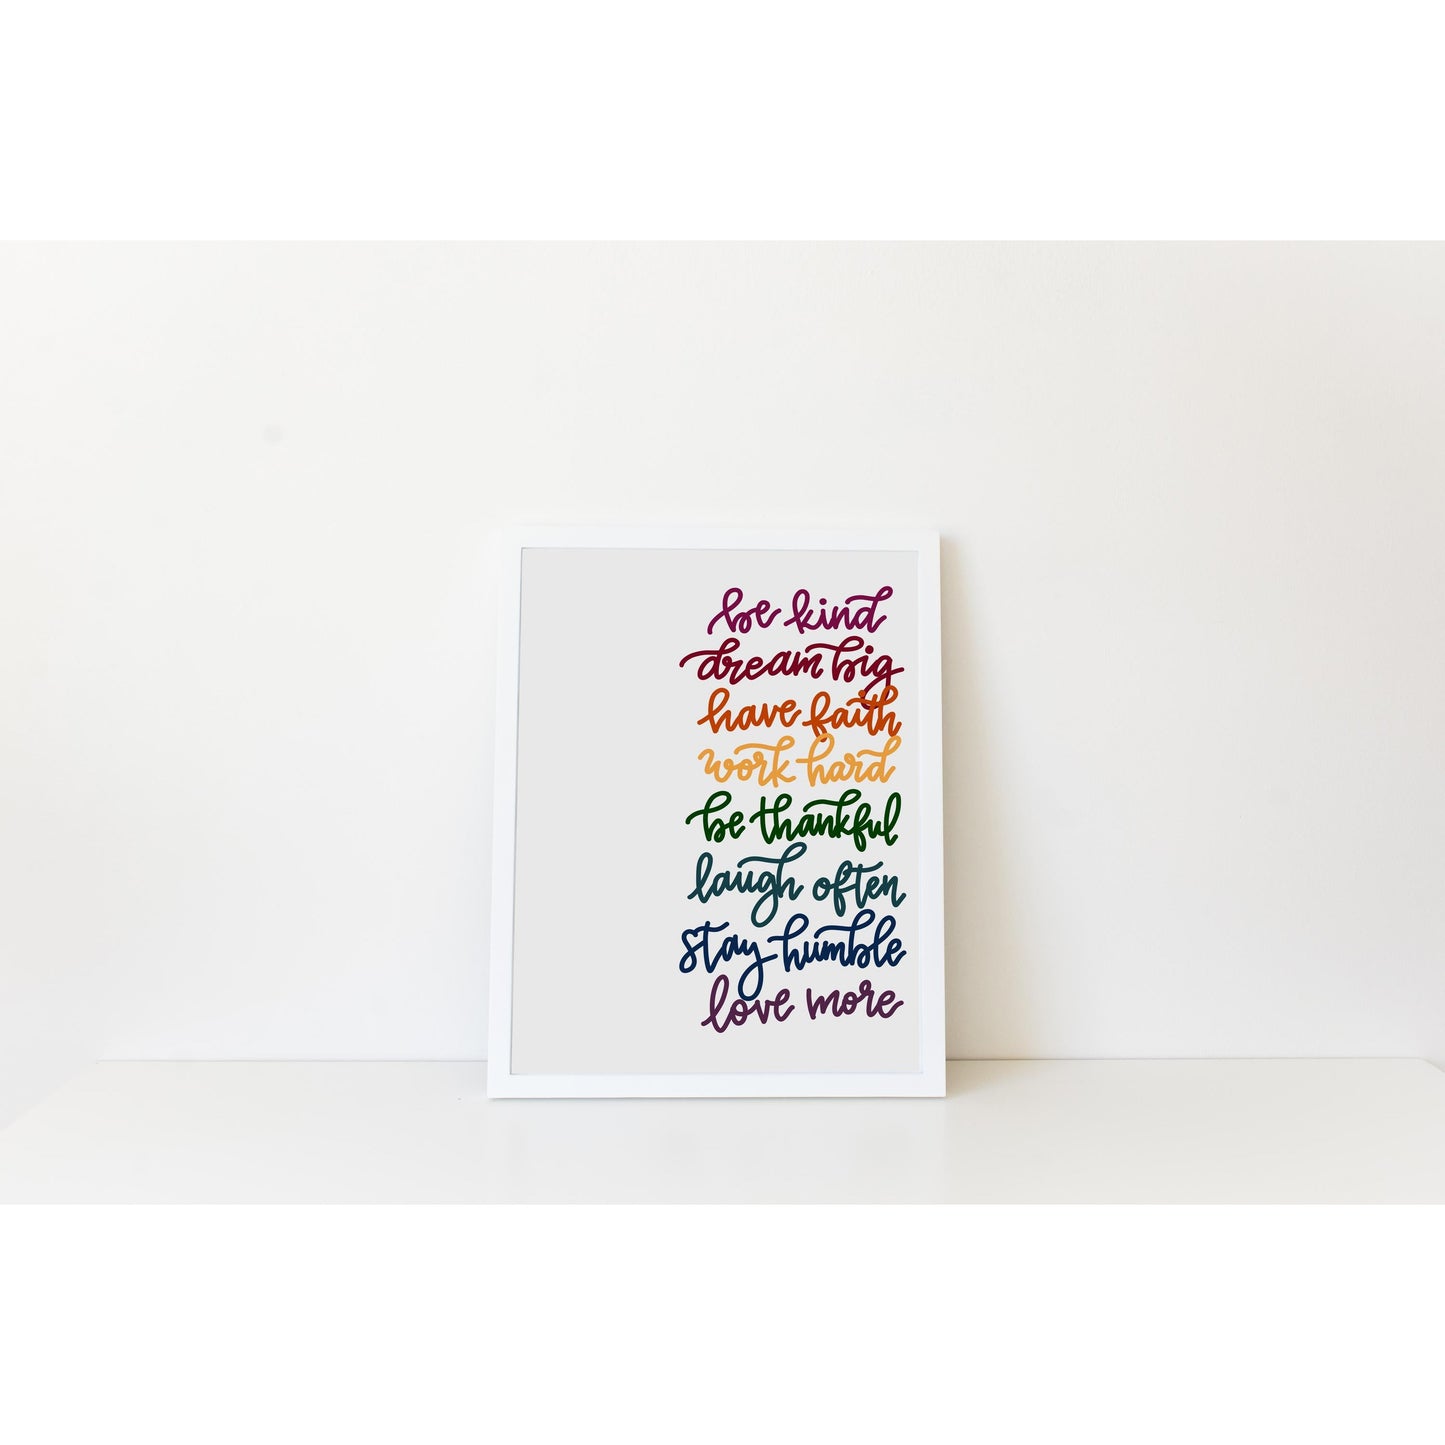 Words to Live By - Print - Wall Art - 8x10